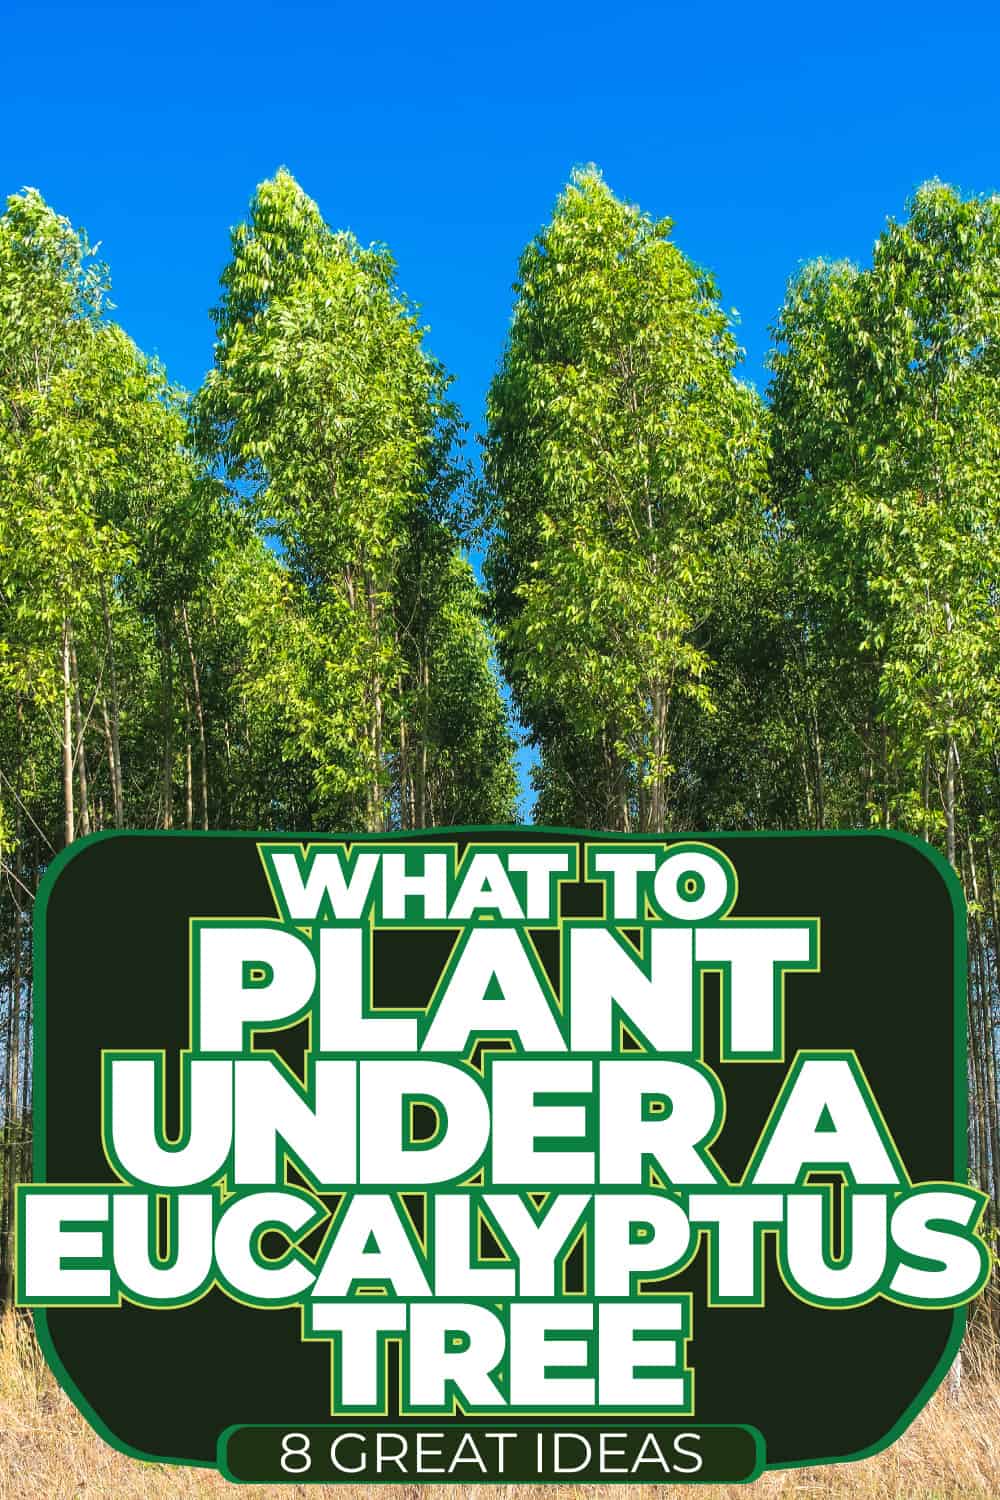 What To Plant Under A Eucalyptus Tree [8 Great Ideas!]